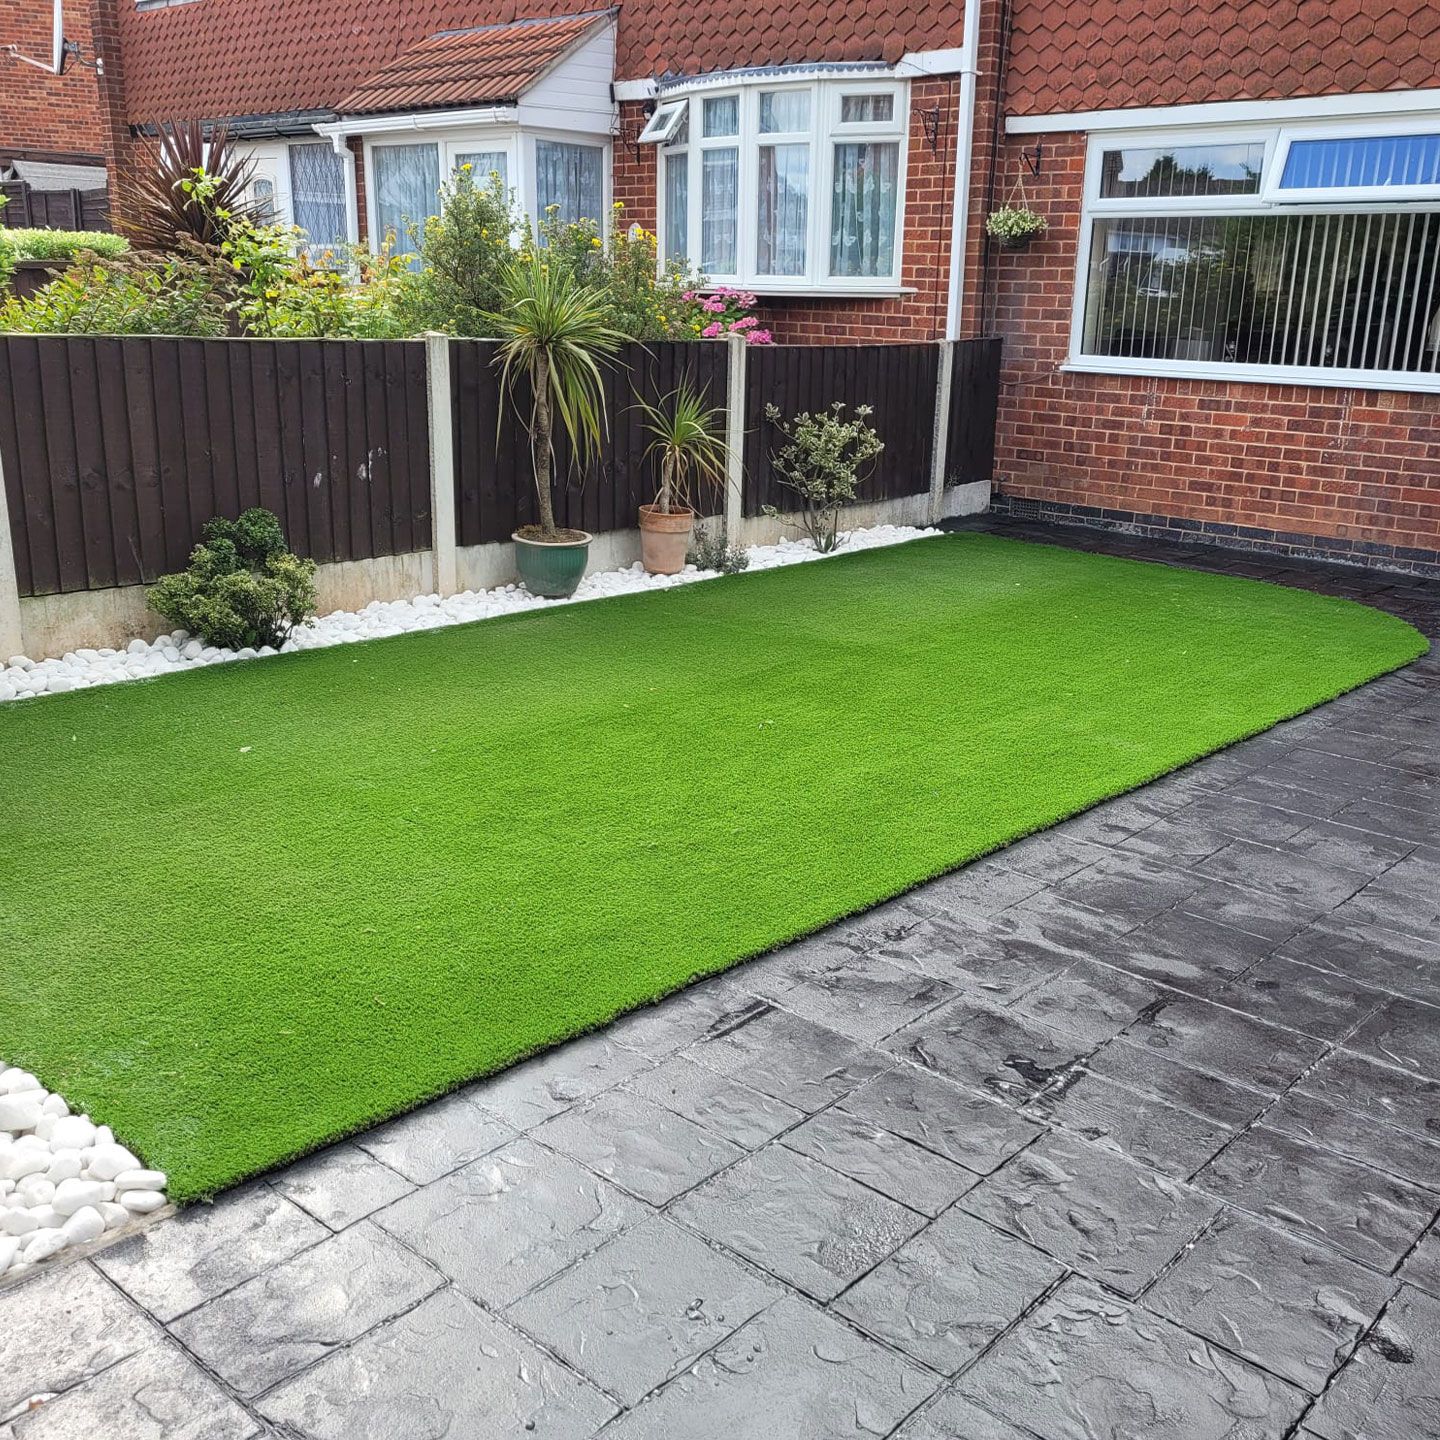 landscaping in Long Lawford showing new artificial grass and patterned concrete paving